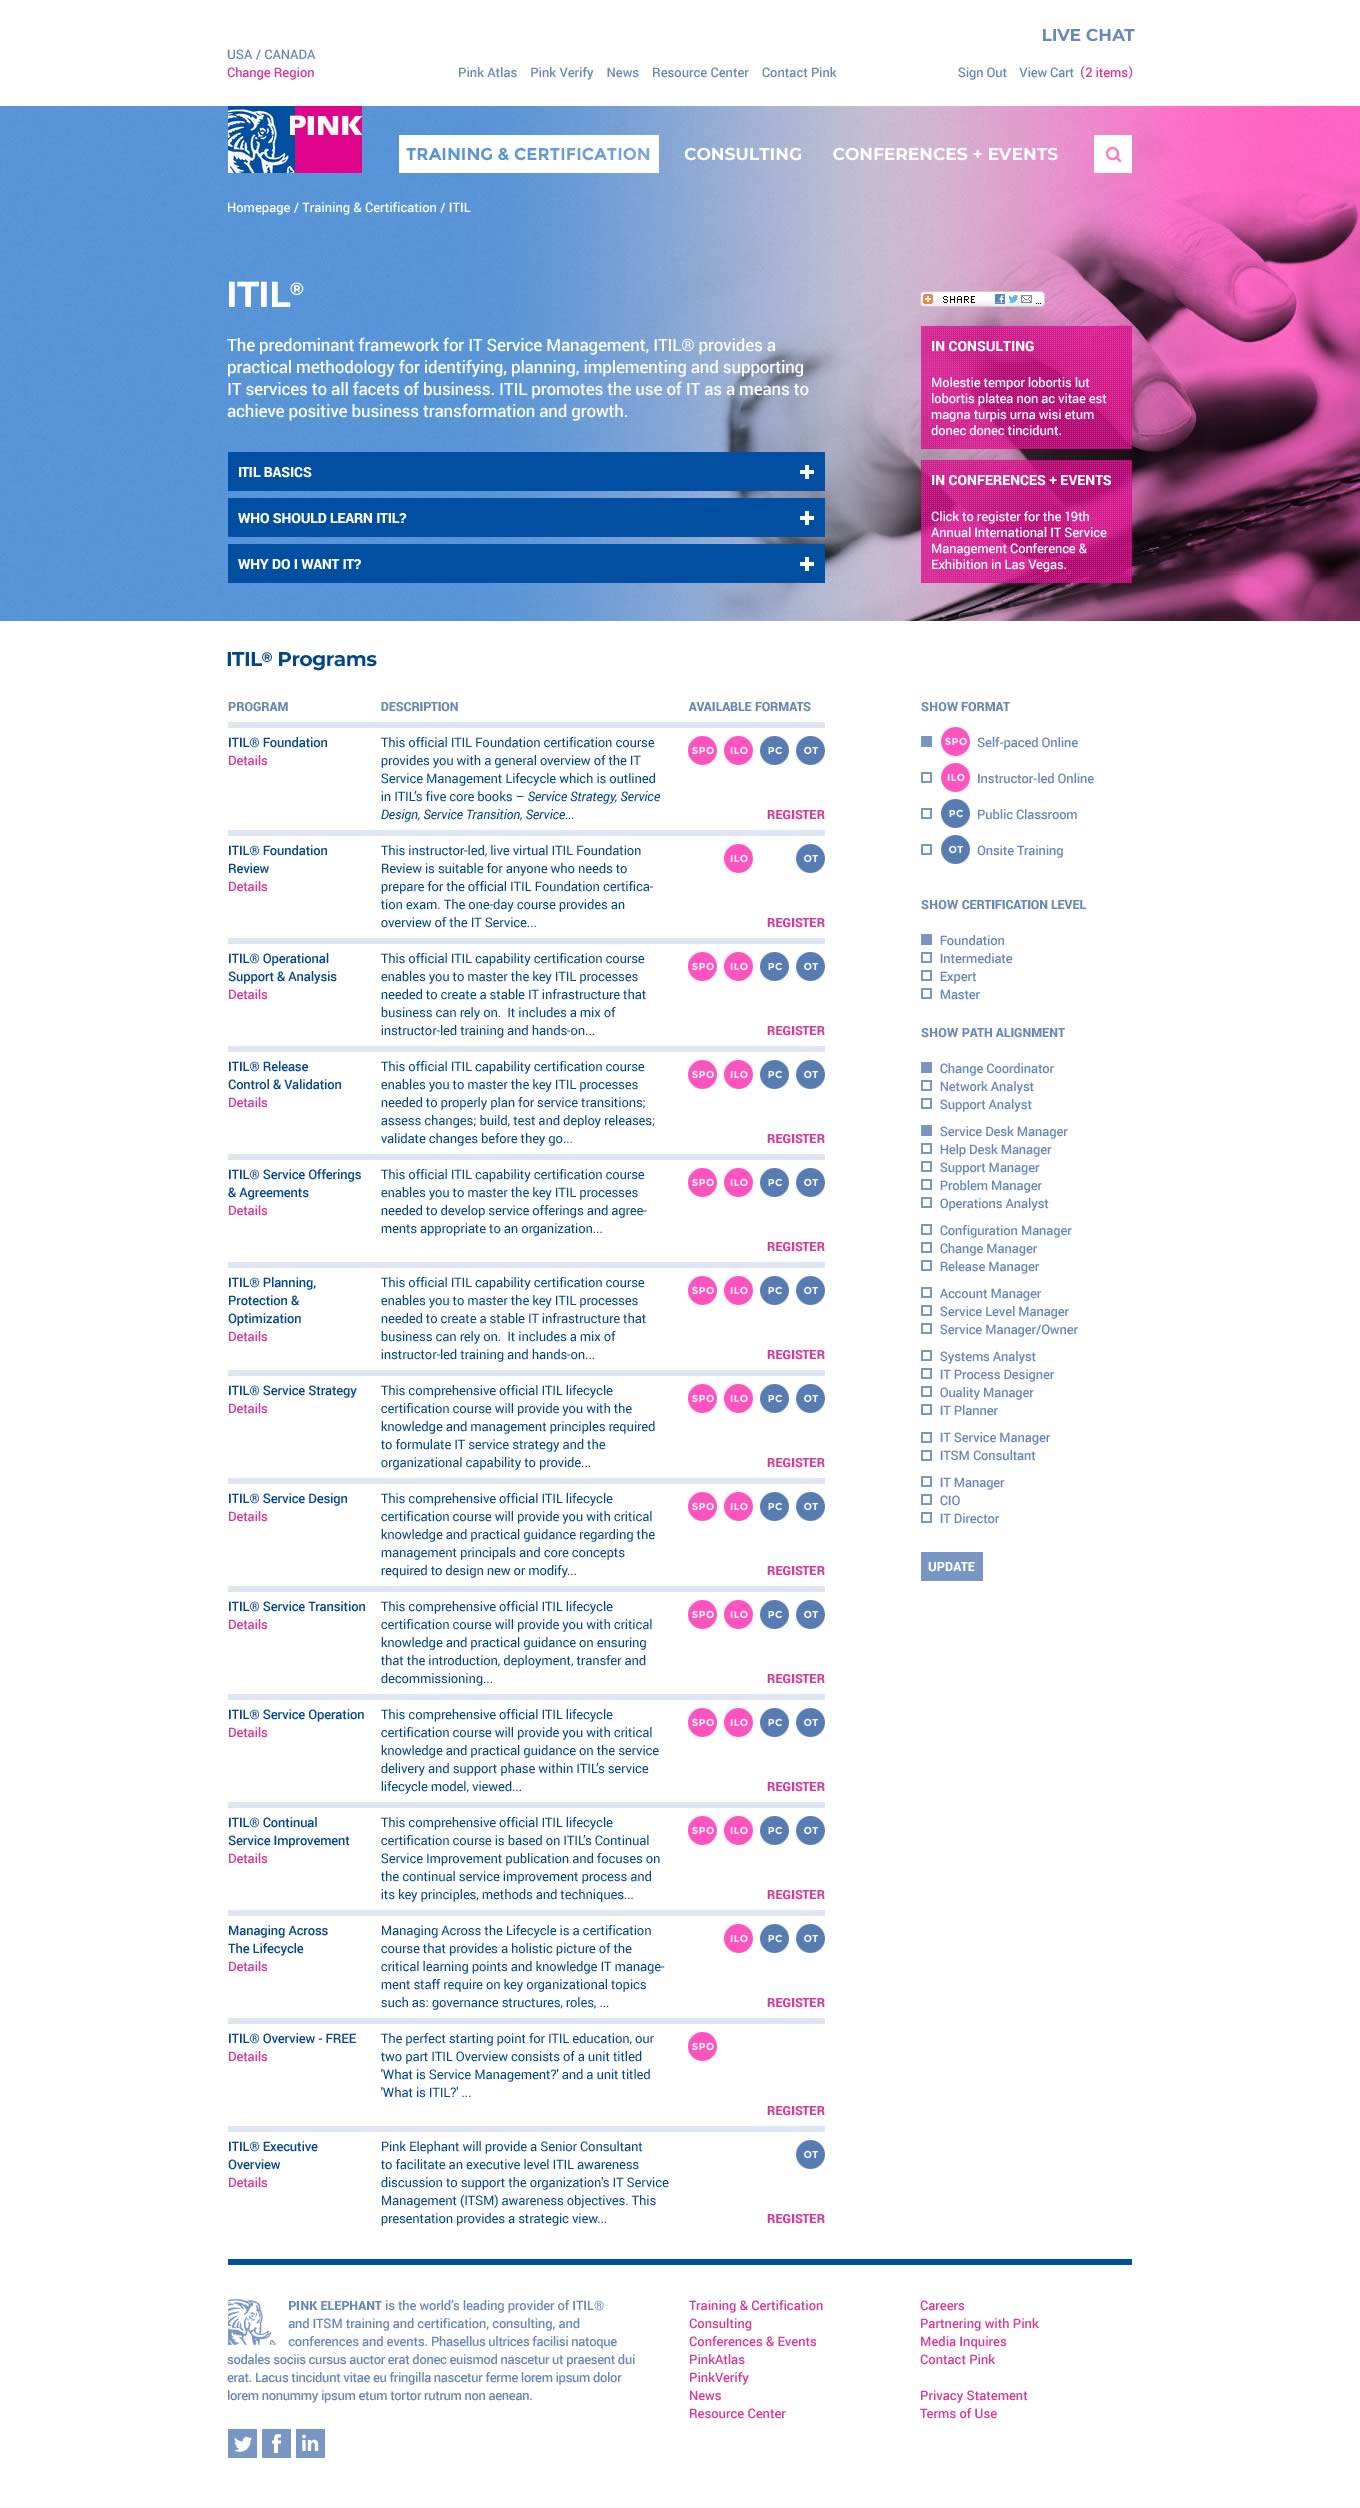 Capture of the full 'ITIL' page from the Pink Elephant website